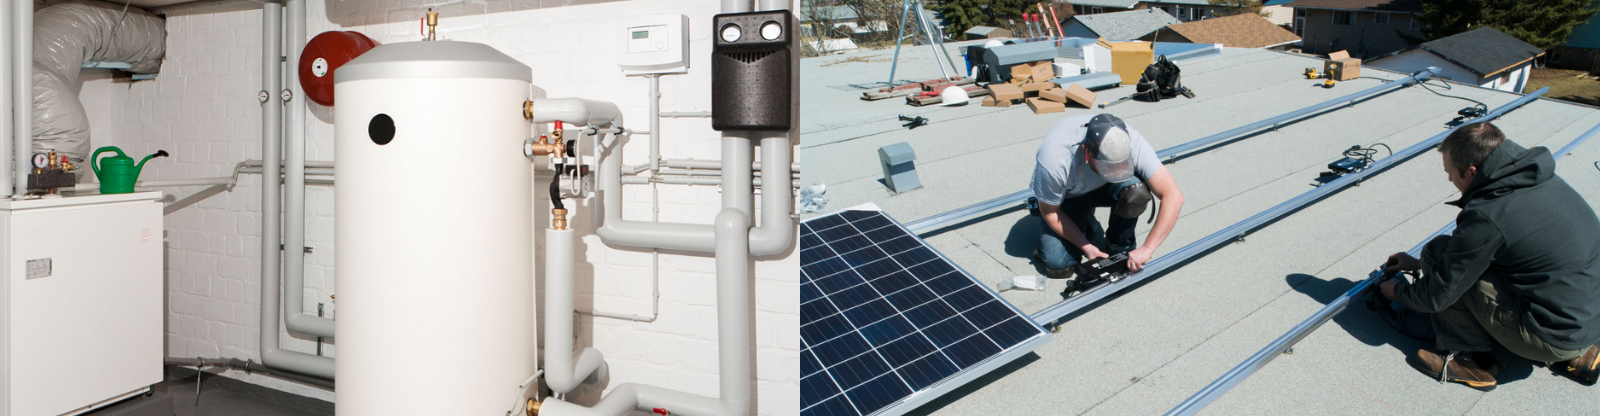 water heater room and solar rooftop installation